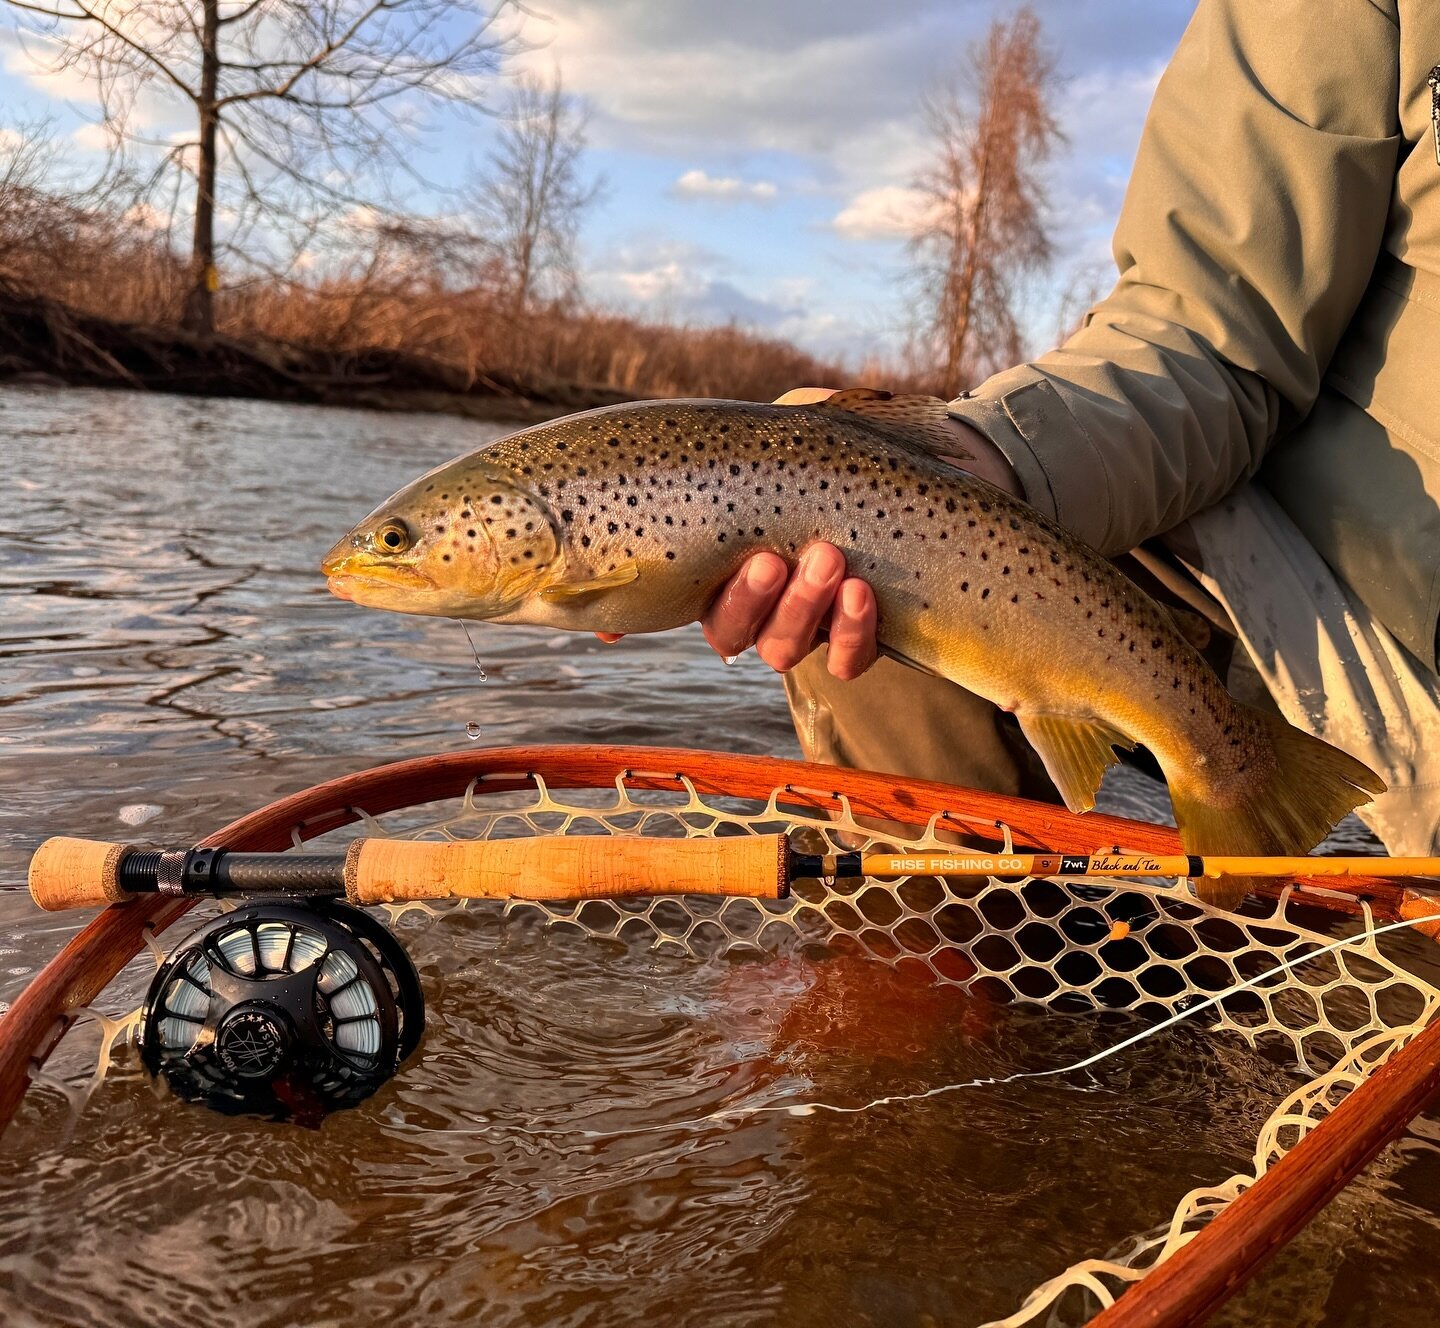 Lovin&rsquo; the colors on our new Black and tan series rods. Nothing like catching that golden hour brown trout 

.
#risefishingco #riserods #riserods4life #browntrout #browntroutfishing #browntroutflyfishing #nyflyfishing #smallbatchflyrods #smallb